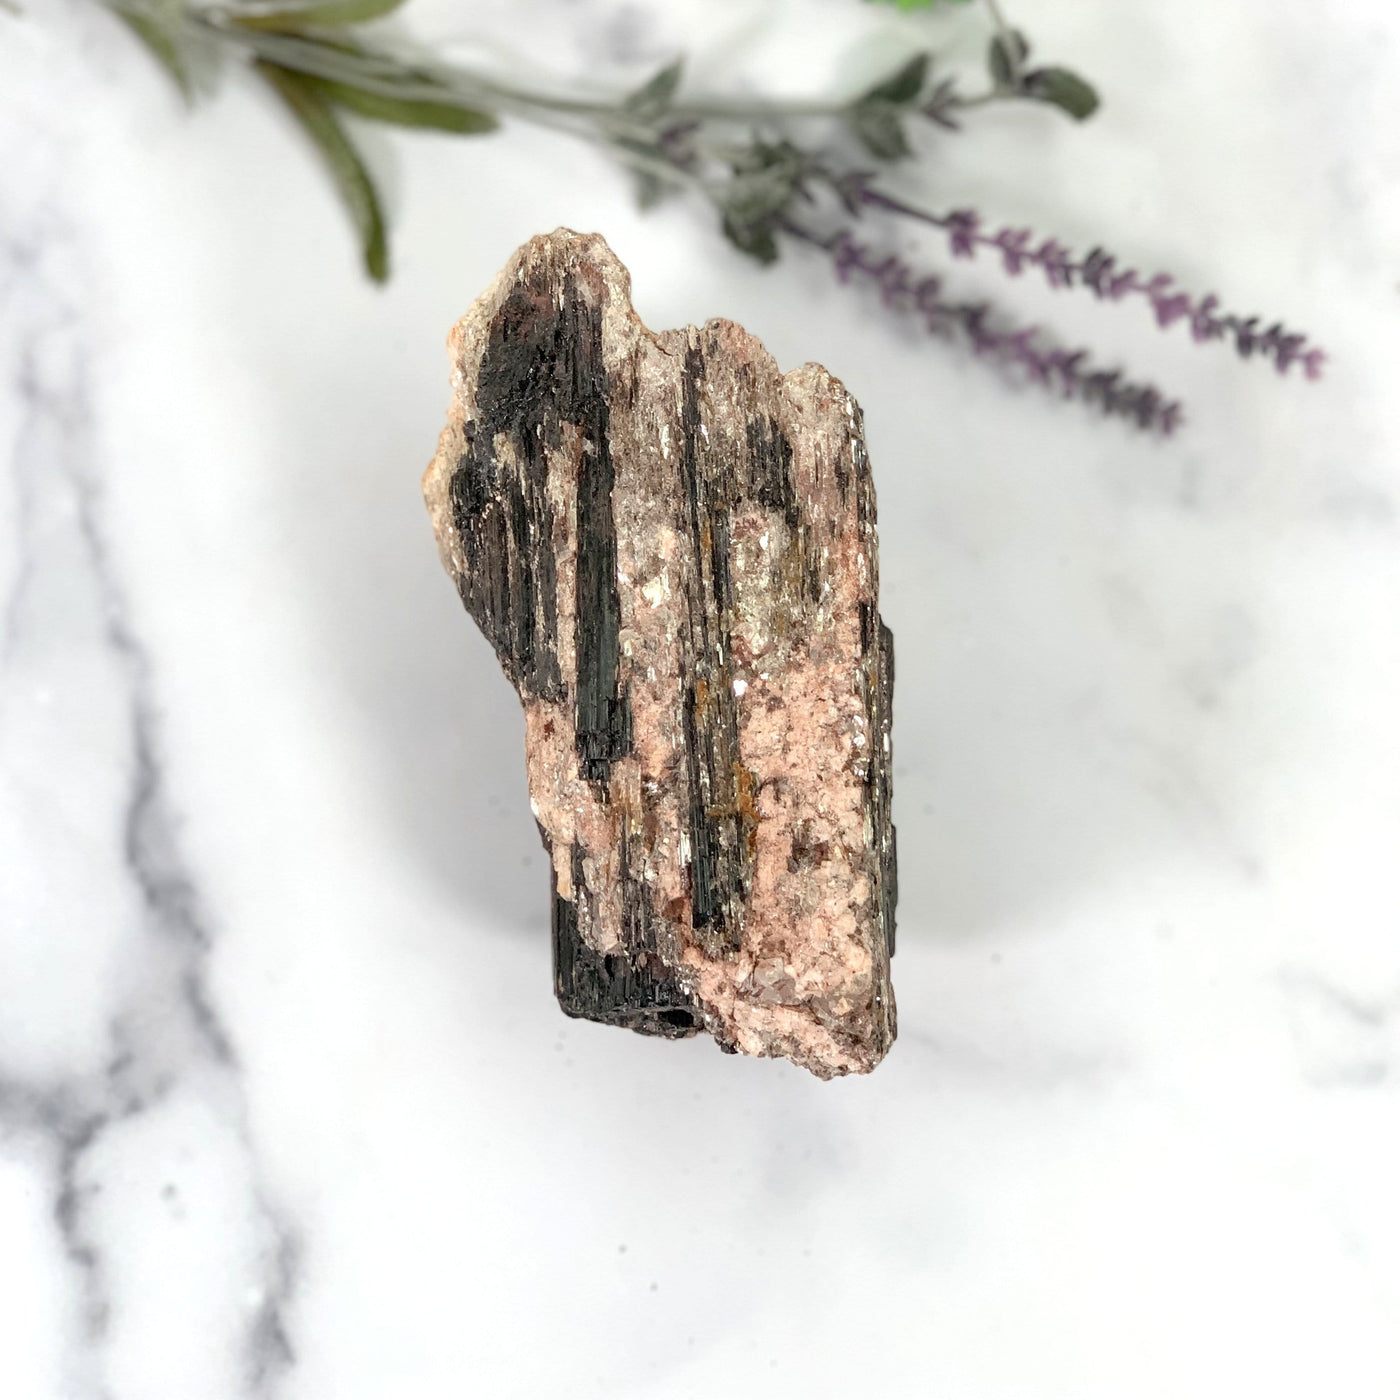 Black Tourmaline with Mica on Matrix on marble background with plants